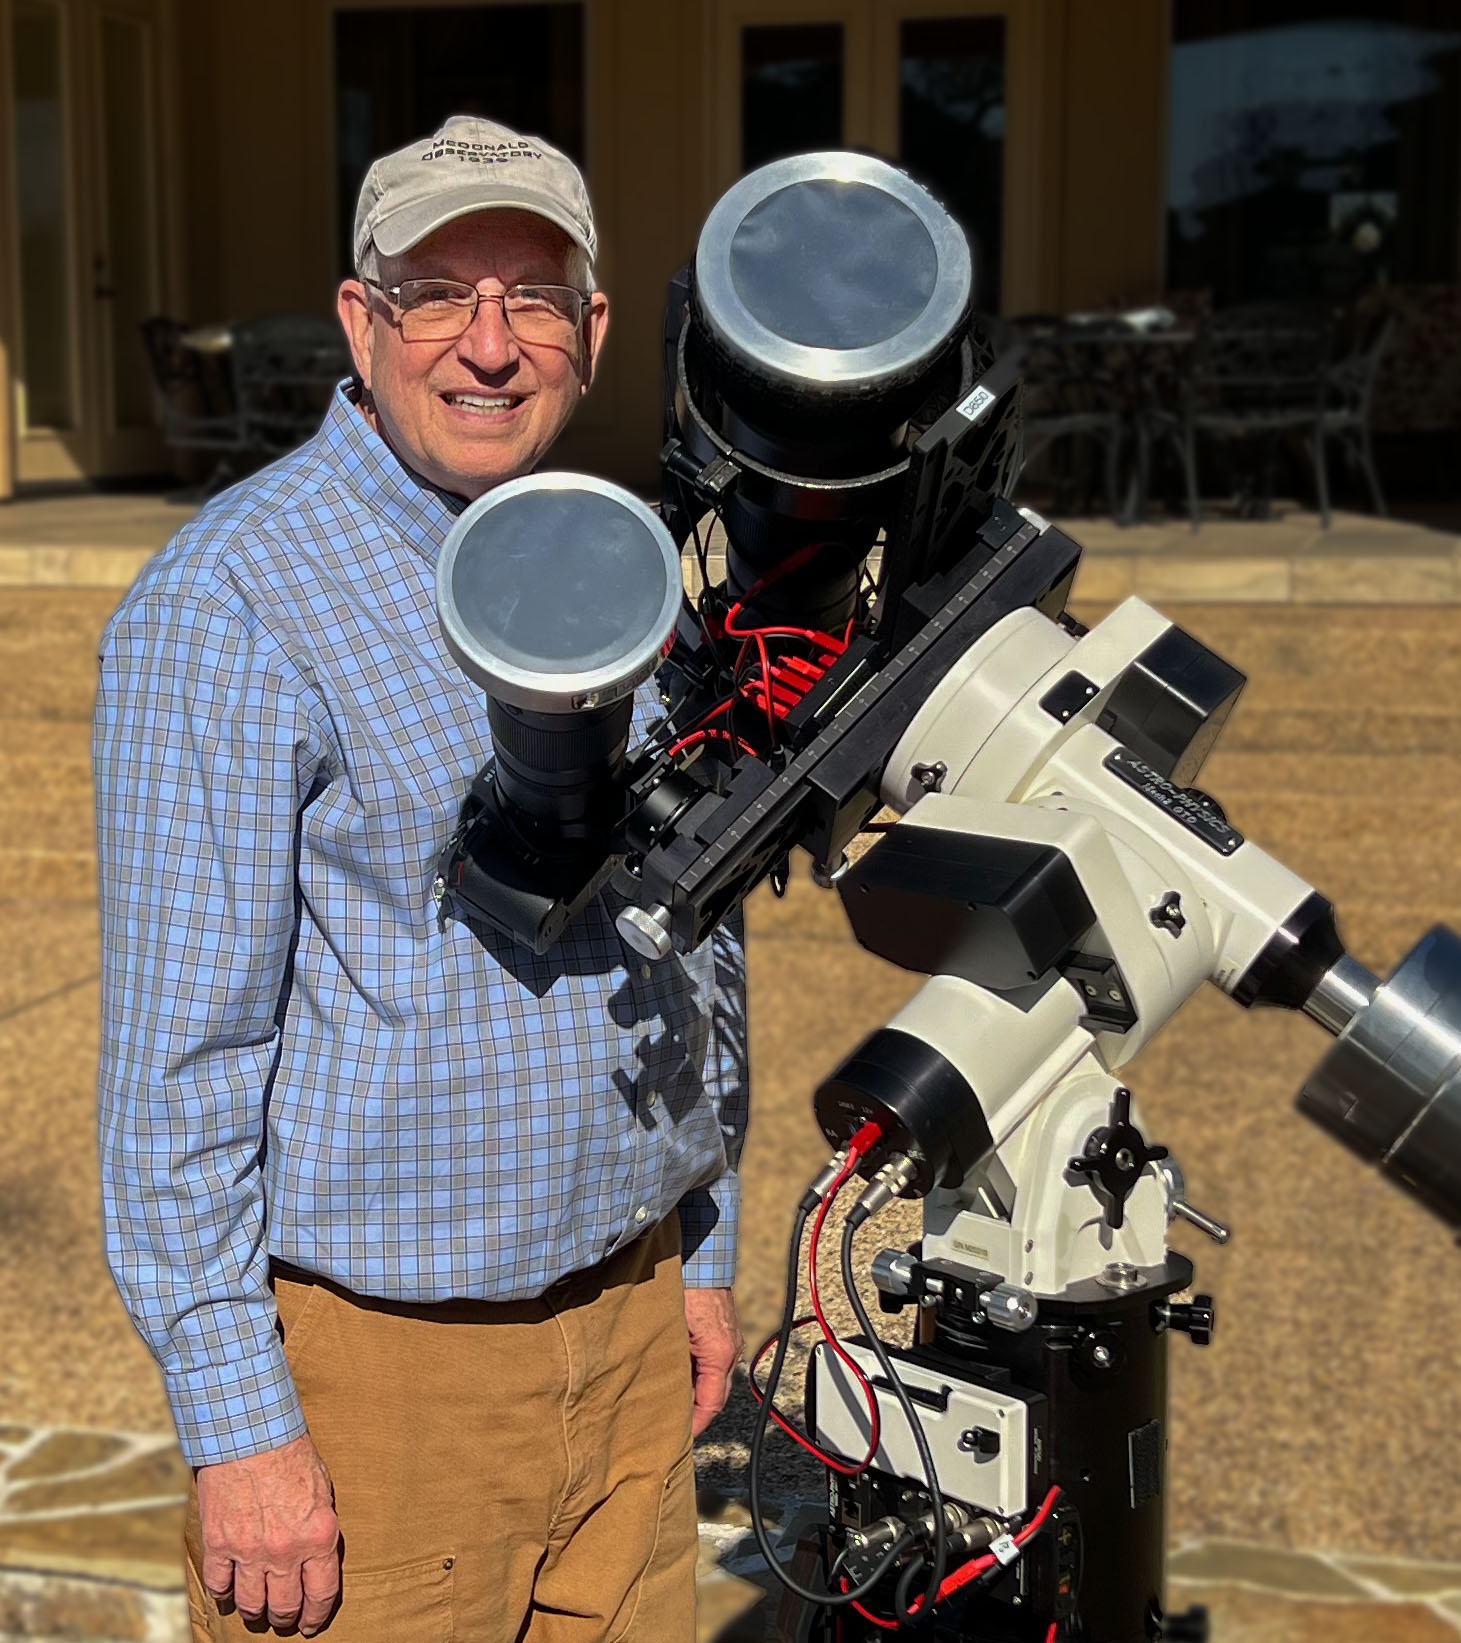 Randall Light with his solar telescope and setup